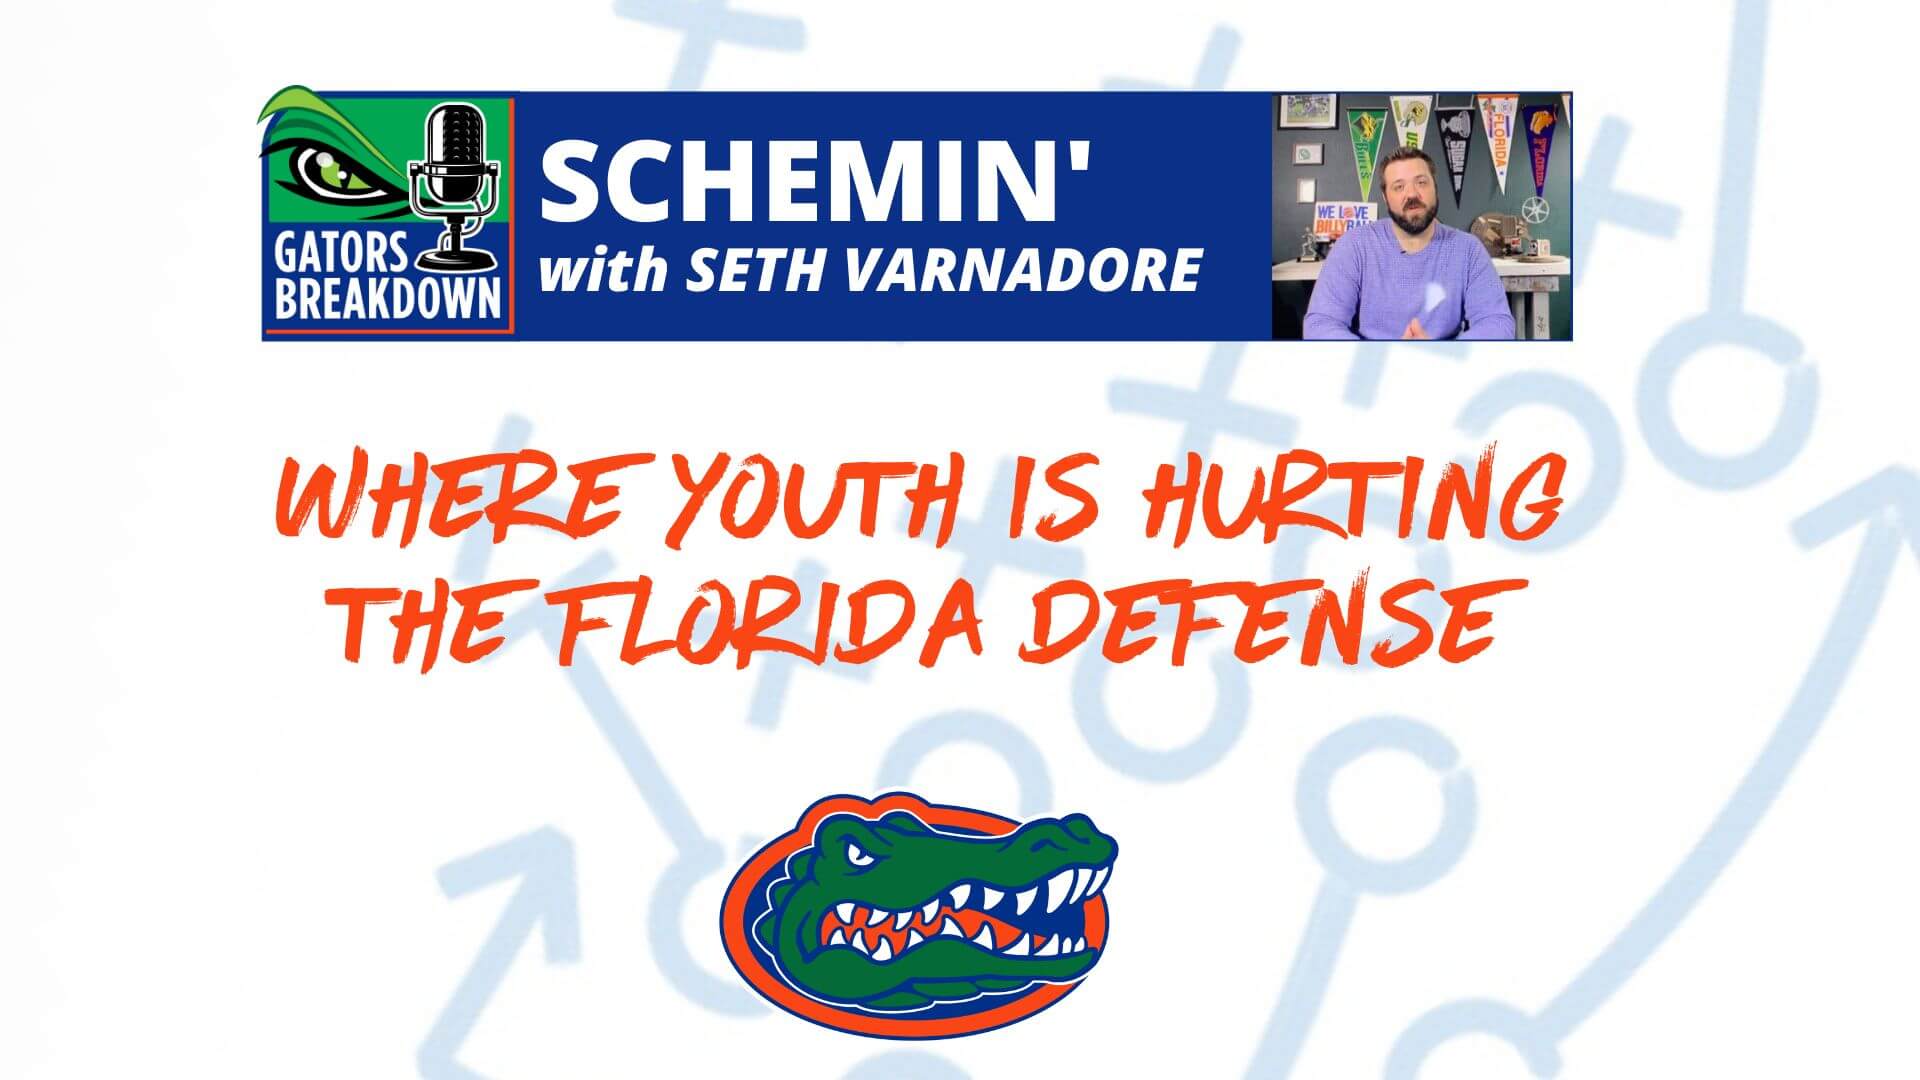 Where youth is hurting the Florida defense